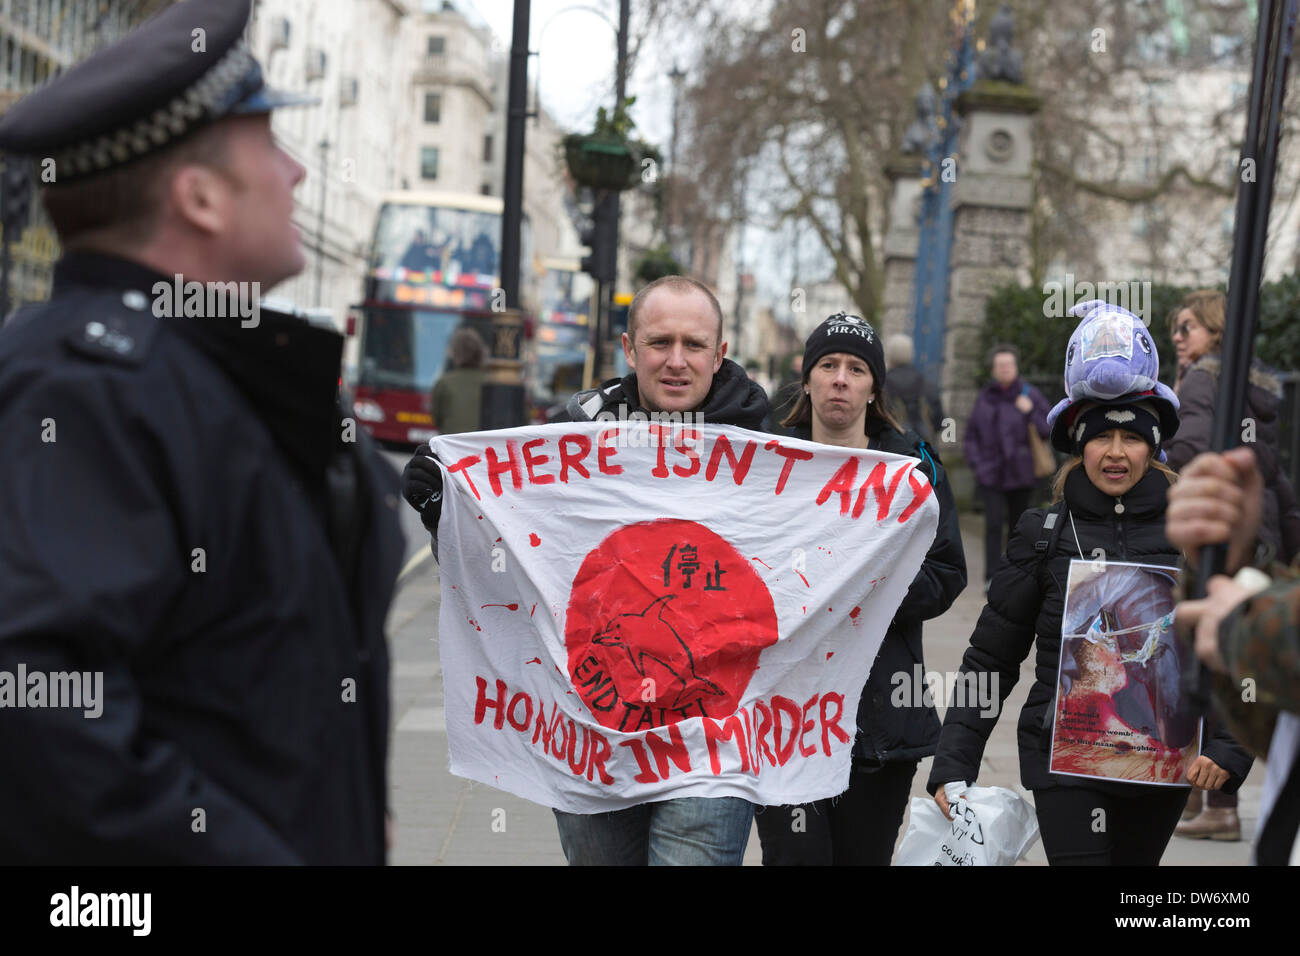 Protest against the slaughter of dolphins and small whales in Taiji, Japan, outside the Japanese Embassy, London, UK Stock Photo